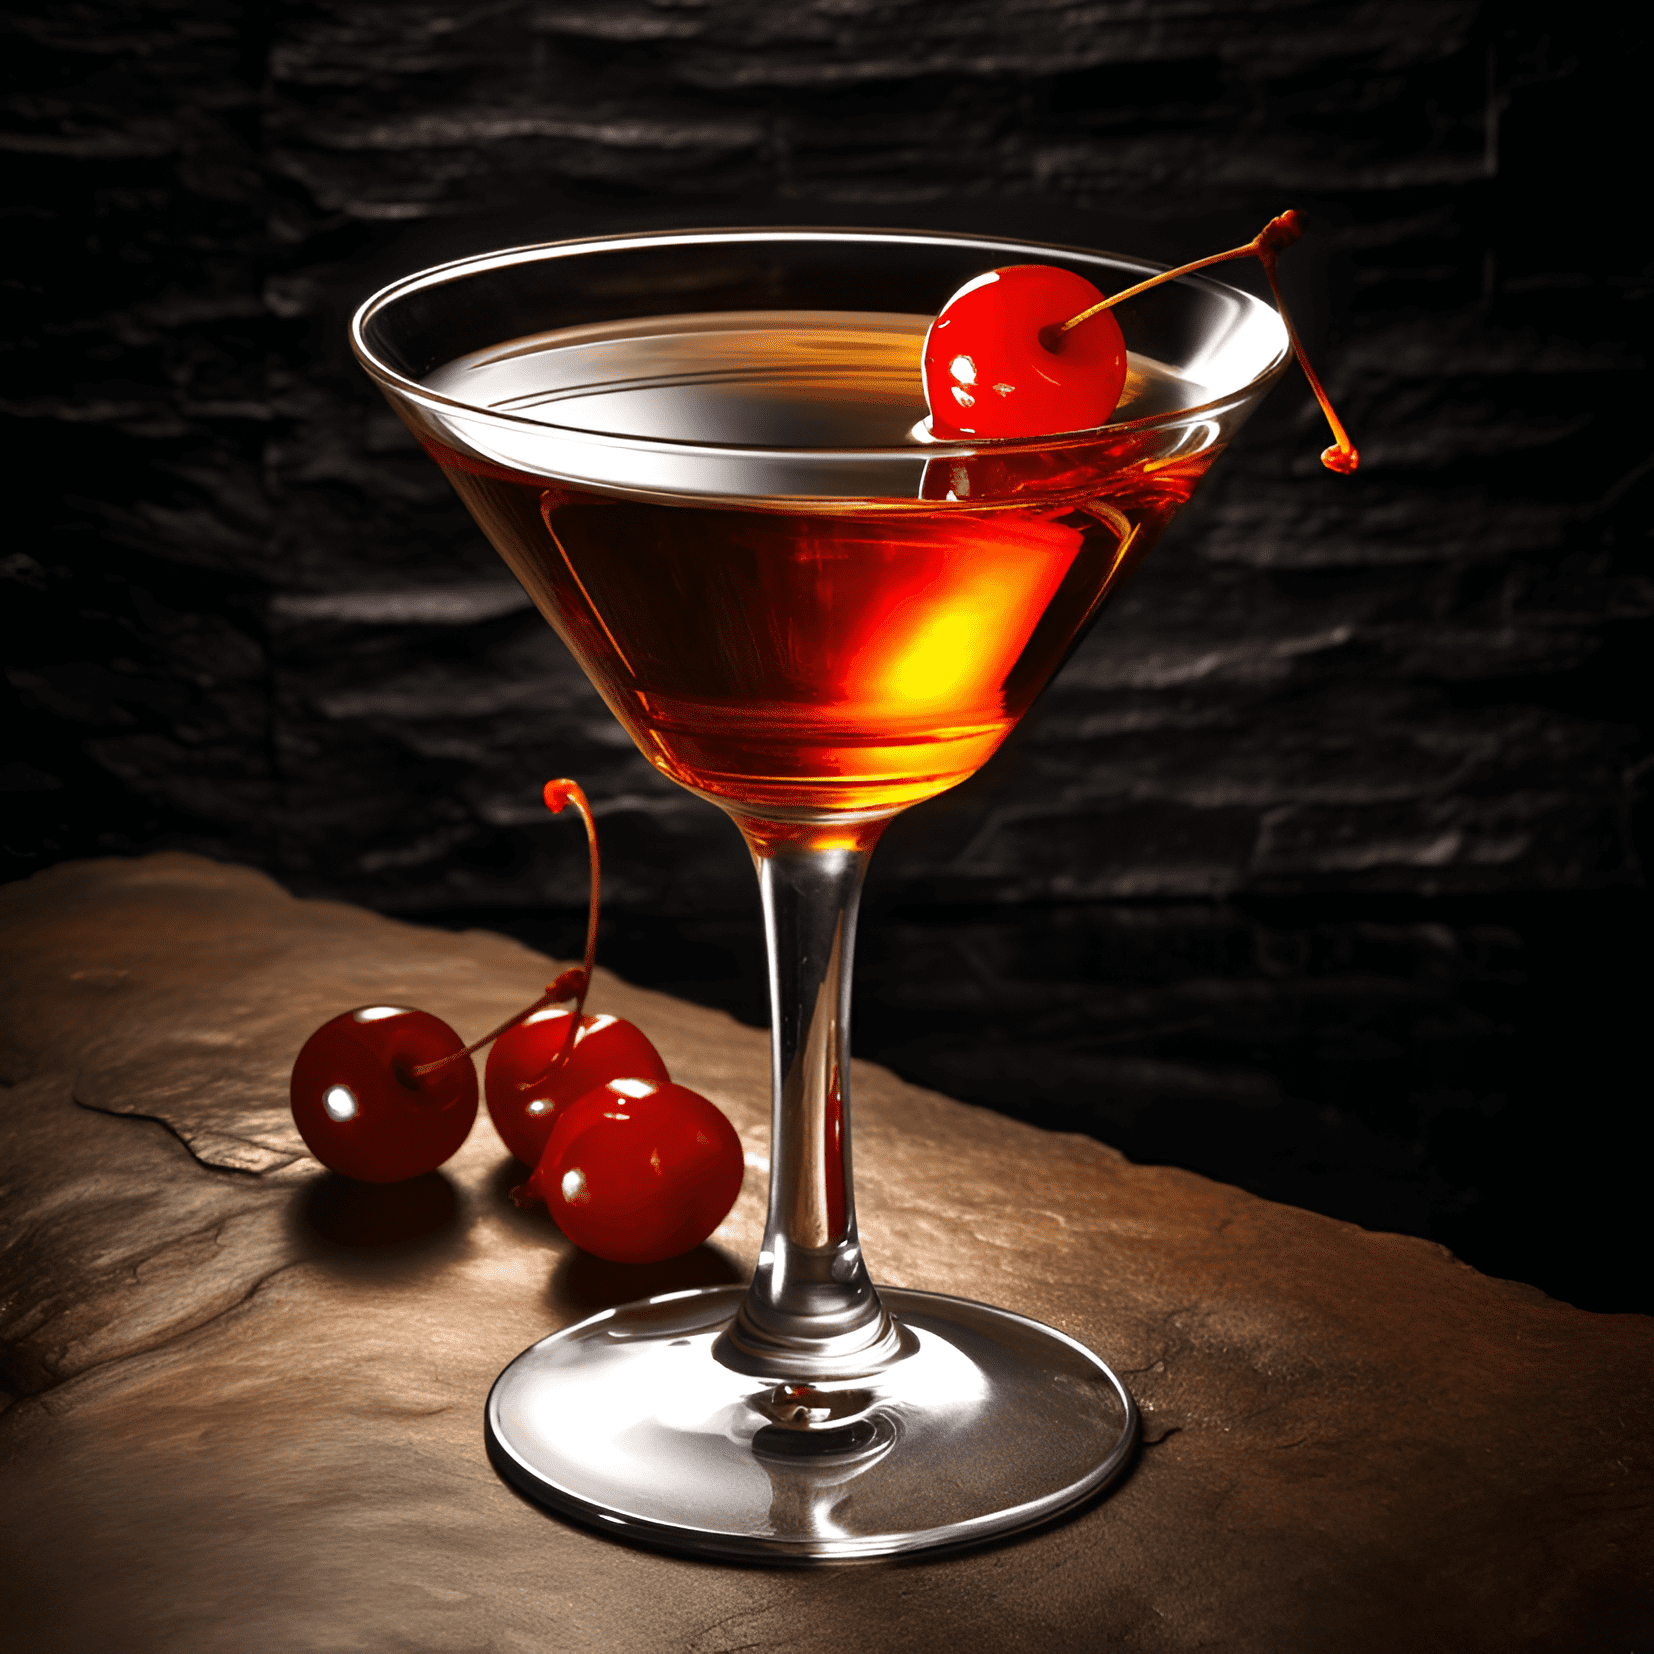 Rob Roy Cocktail Recipe - The Rob Roy has a rich, smoky, and slightly sweet taste with a hint of bitterness from the vermouth. It has a warming and full-bodied mouthfeel, making it a perfect sipping cocktail for colder months.